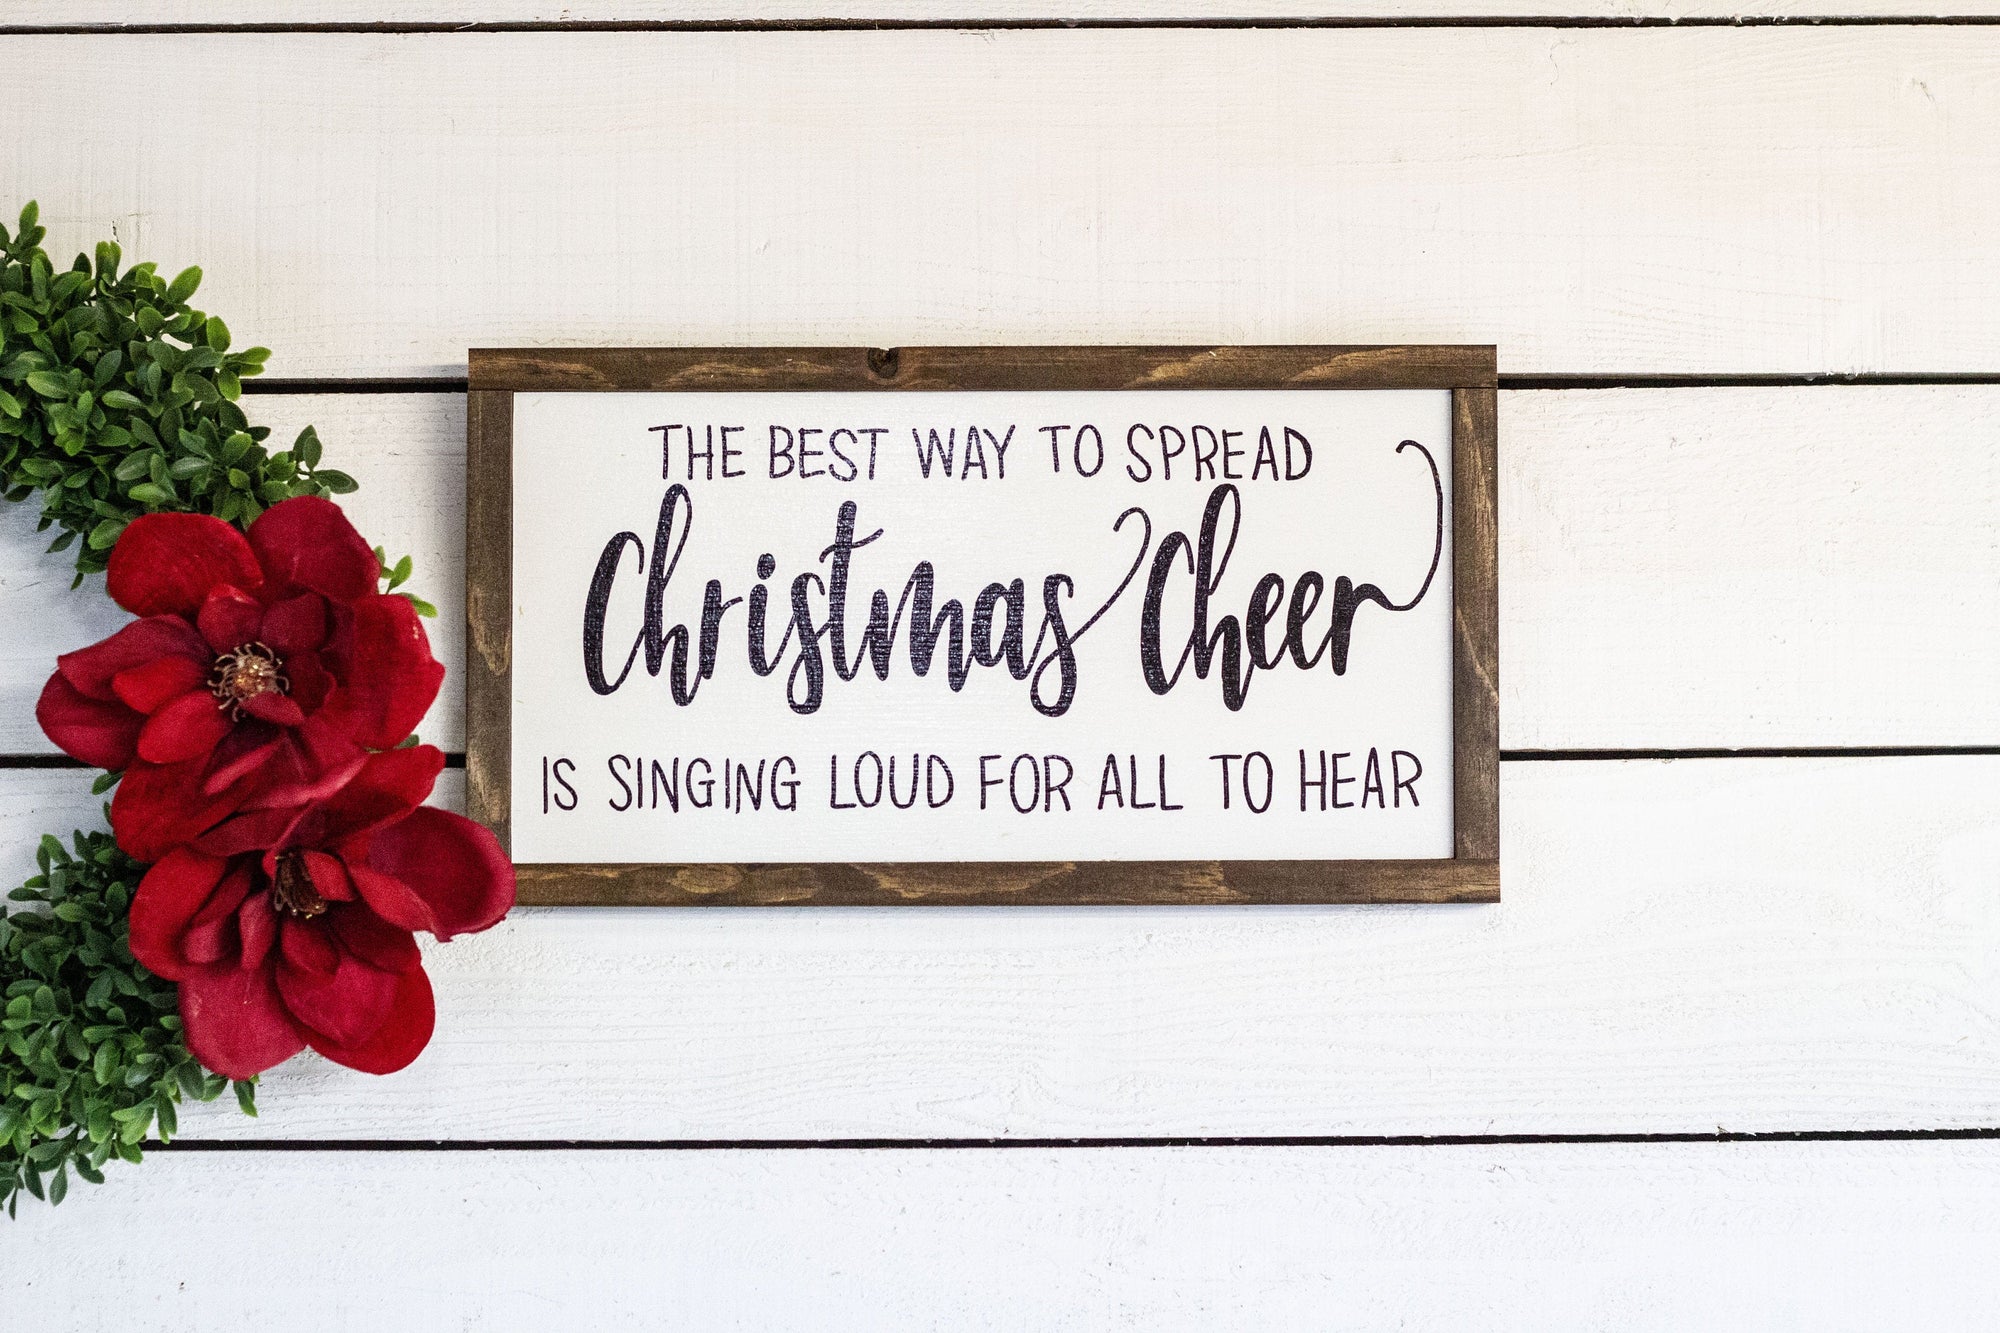 The best way to spread Christmas Cheer is singing loud for all to hear